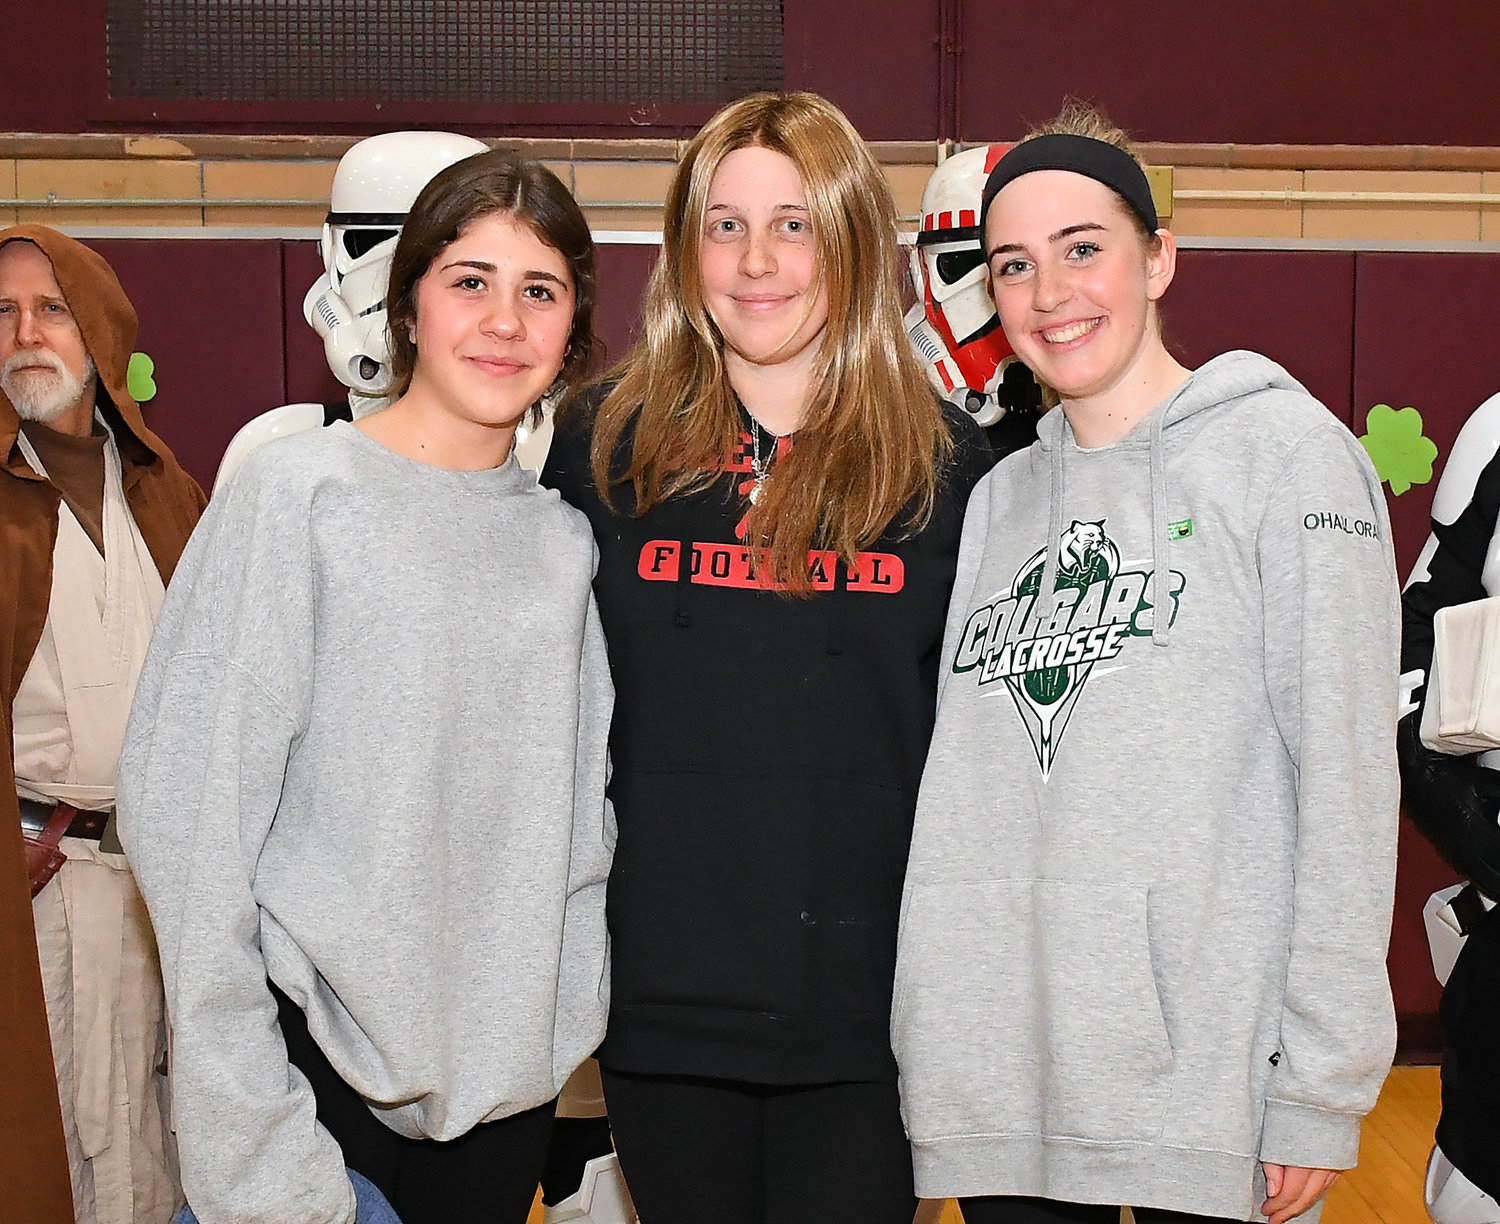 The Bellmore-Merrick Central High School District honored several students who are either fighting cancer or have survived the disease. From left are sisters Kristen, Kate and Jillian O’Halloran. Kristen is a cancer survivor, and Kate is currently battling the disease.